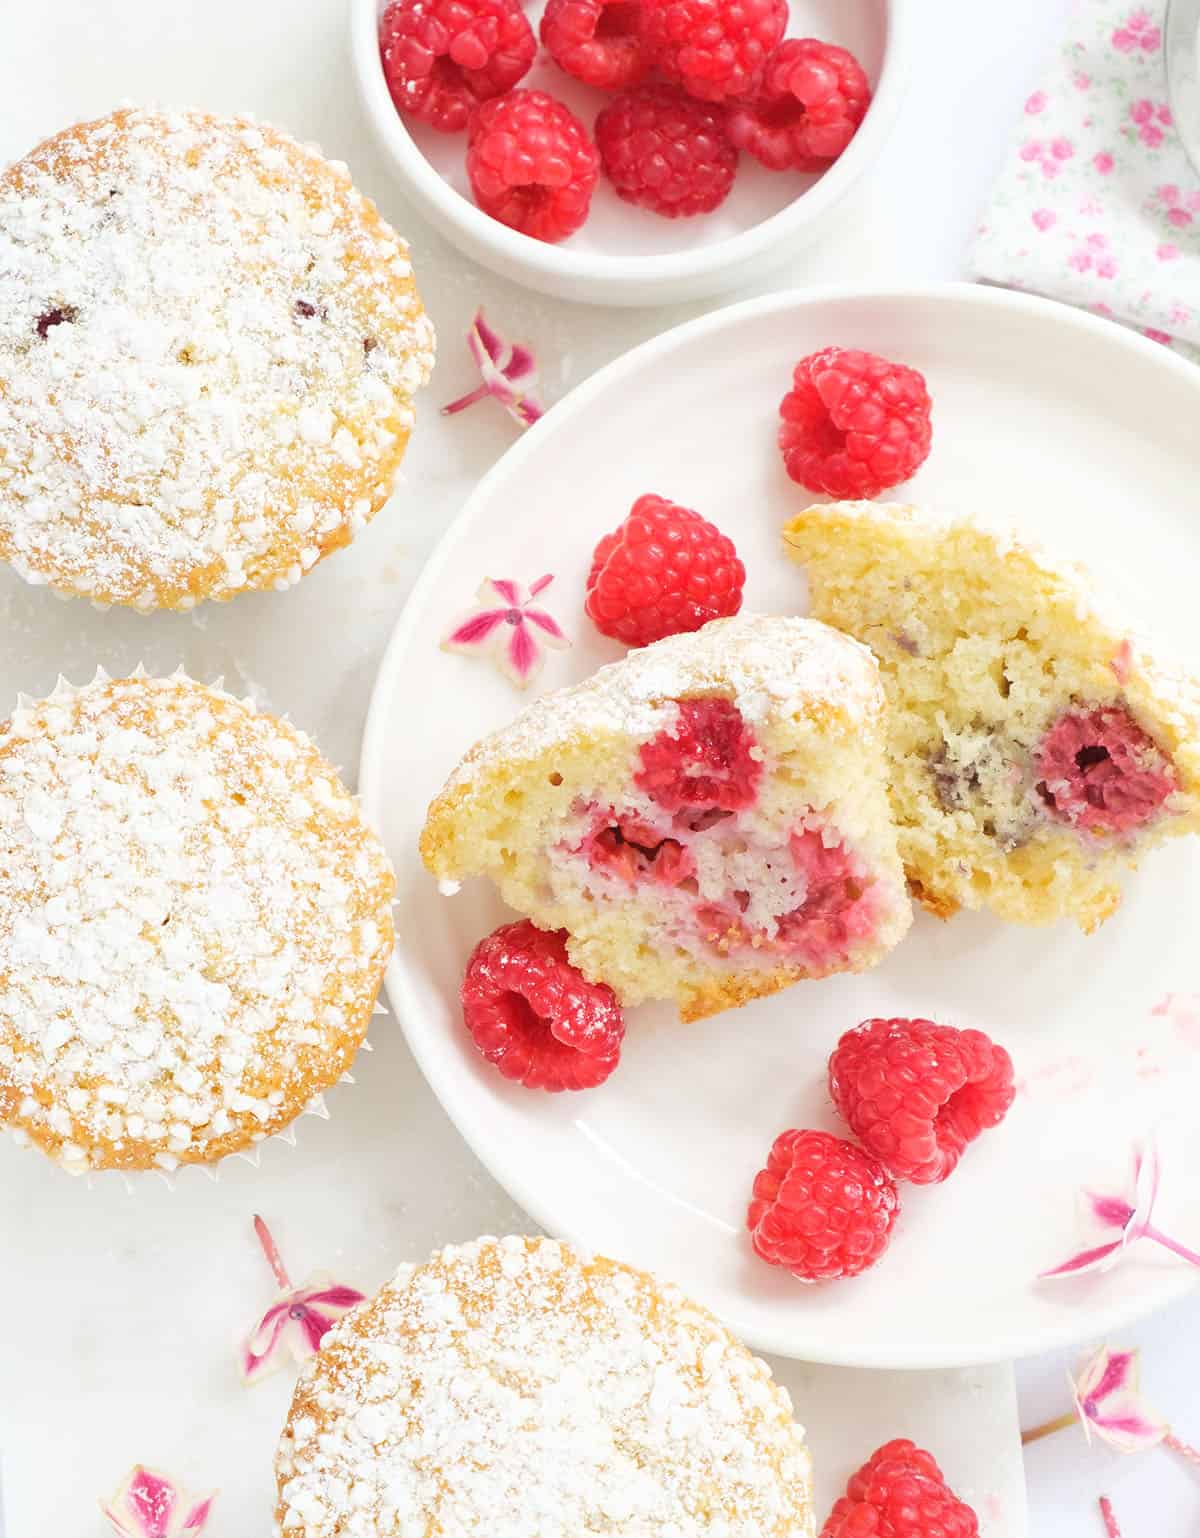 Top view of a few muffins on a white background showing their moist texture packed with juicy raspberries.